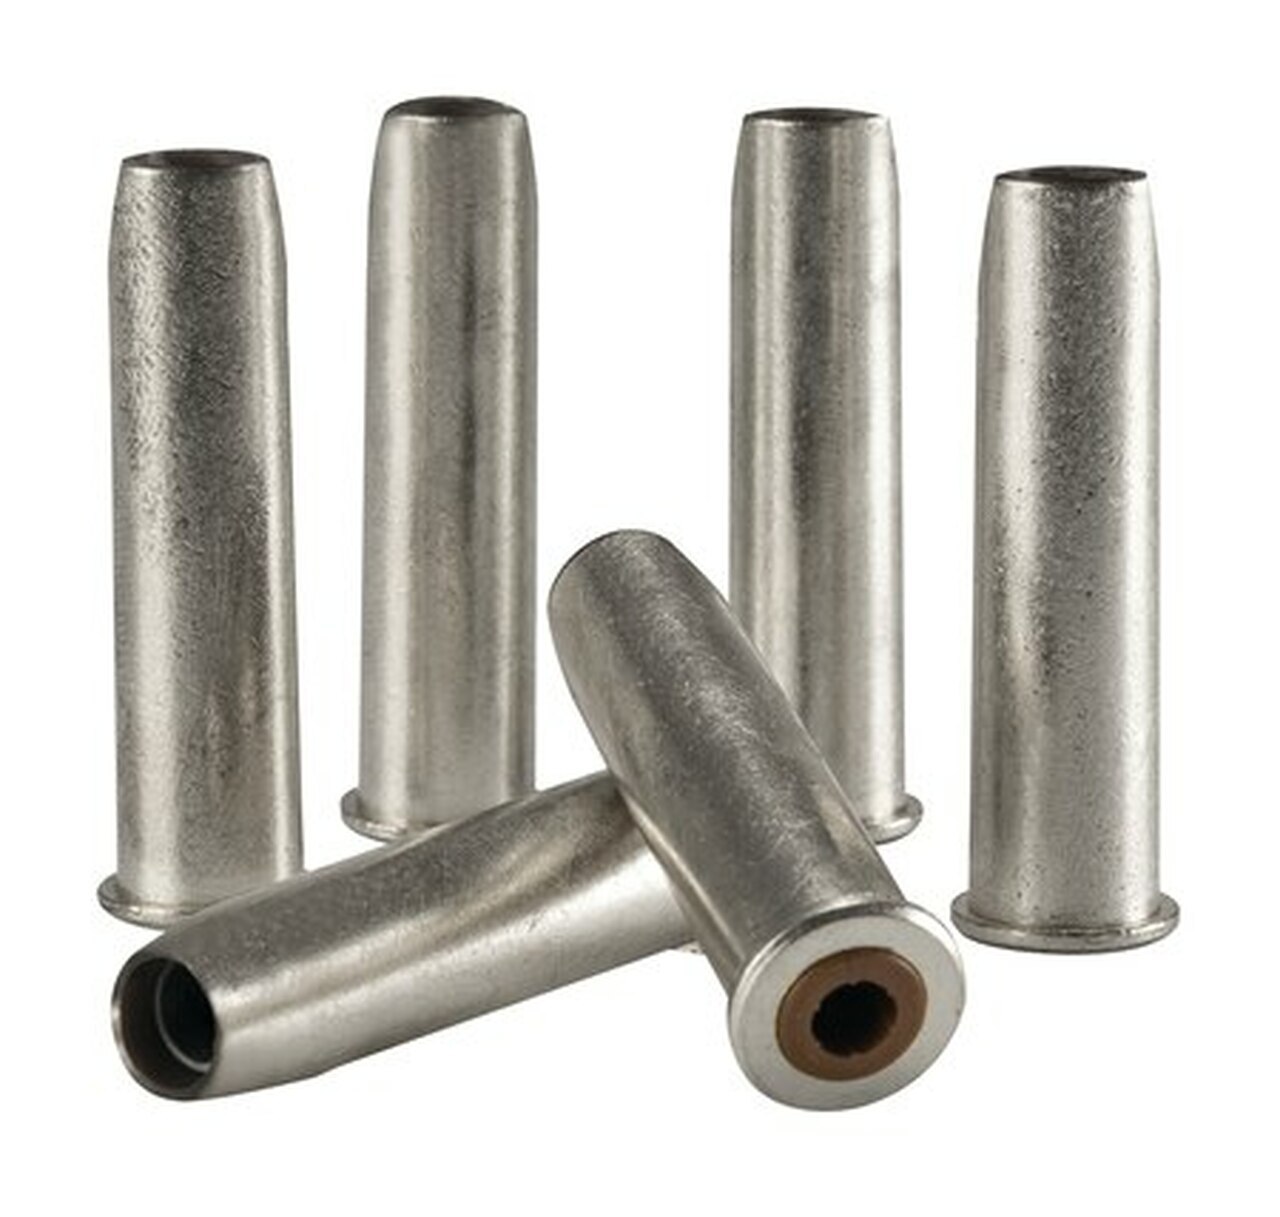 Image of Umarex Colt Peacemaker Silver Cartridges, .177 BB, 6 count